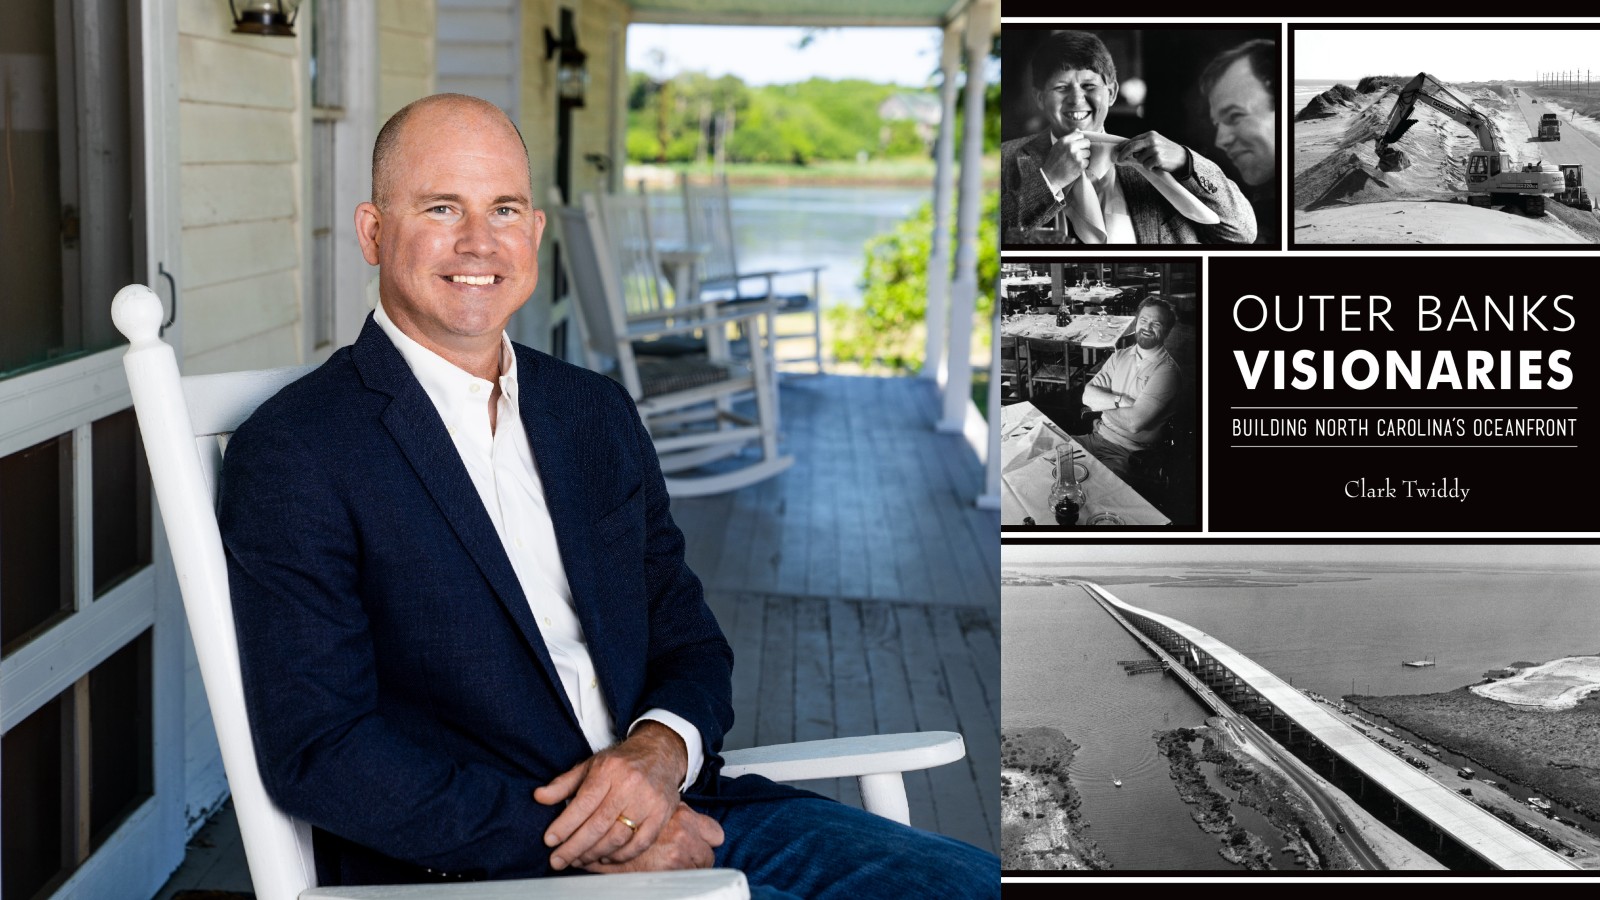 New book by Clark Twiddy featuring visionaries that built the Outer Banks now on sale